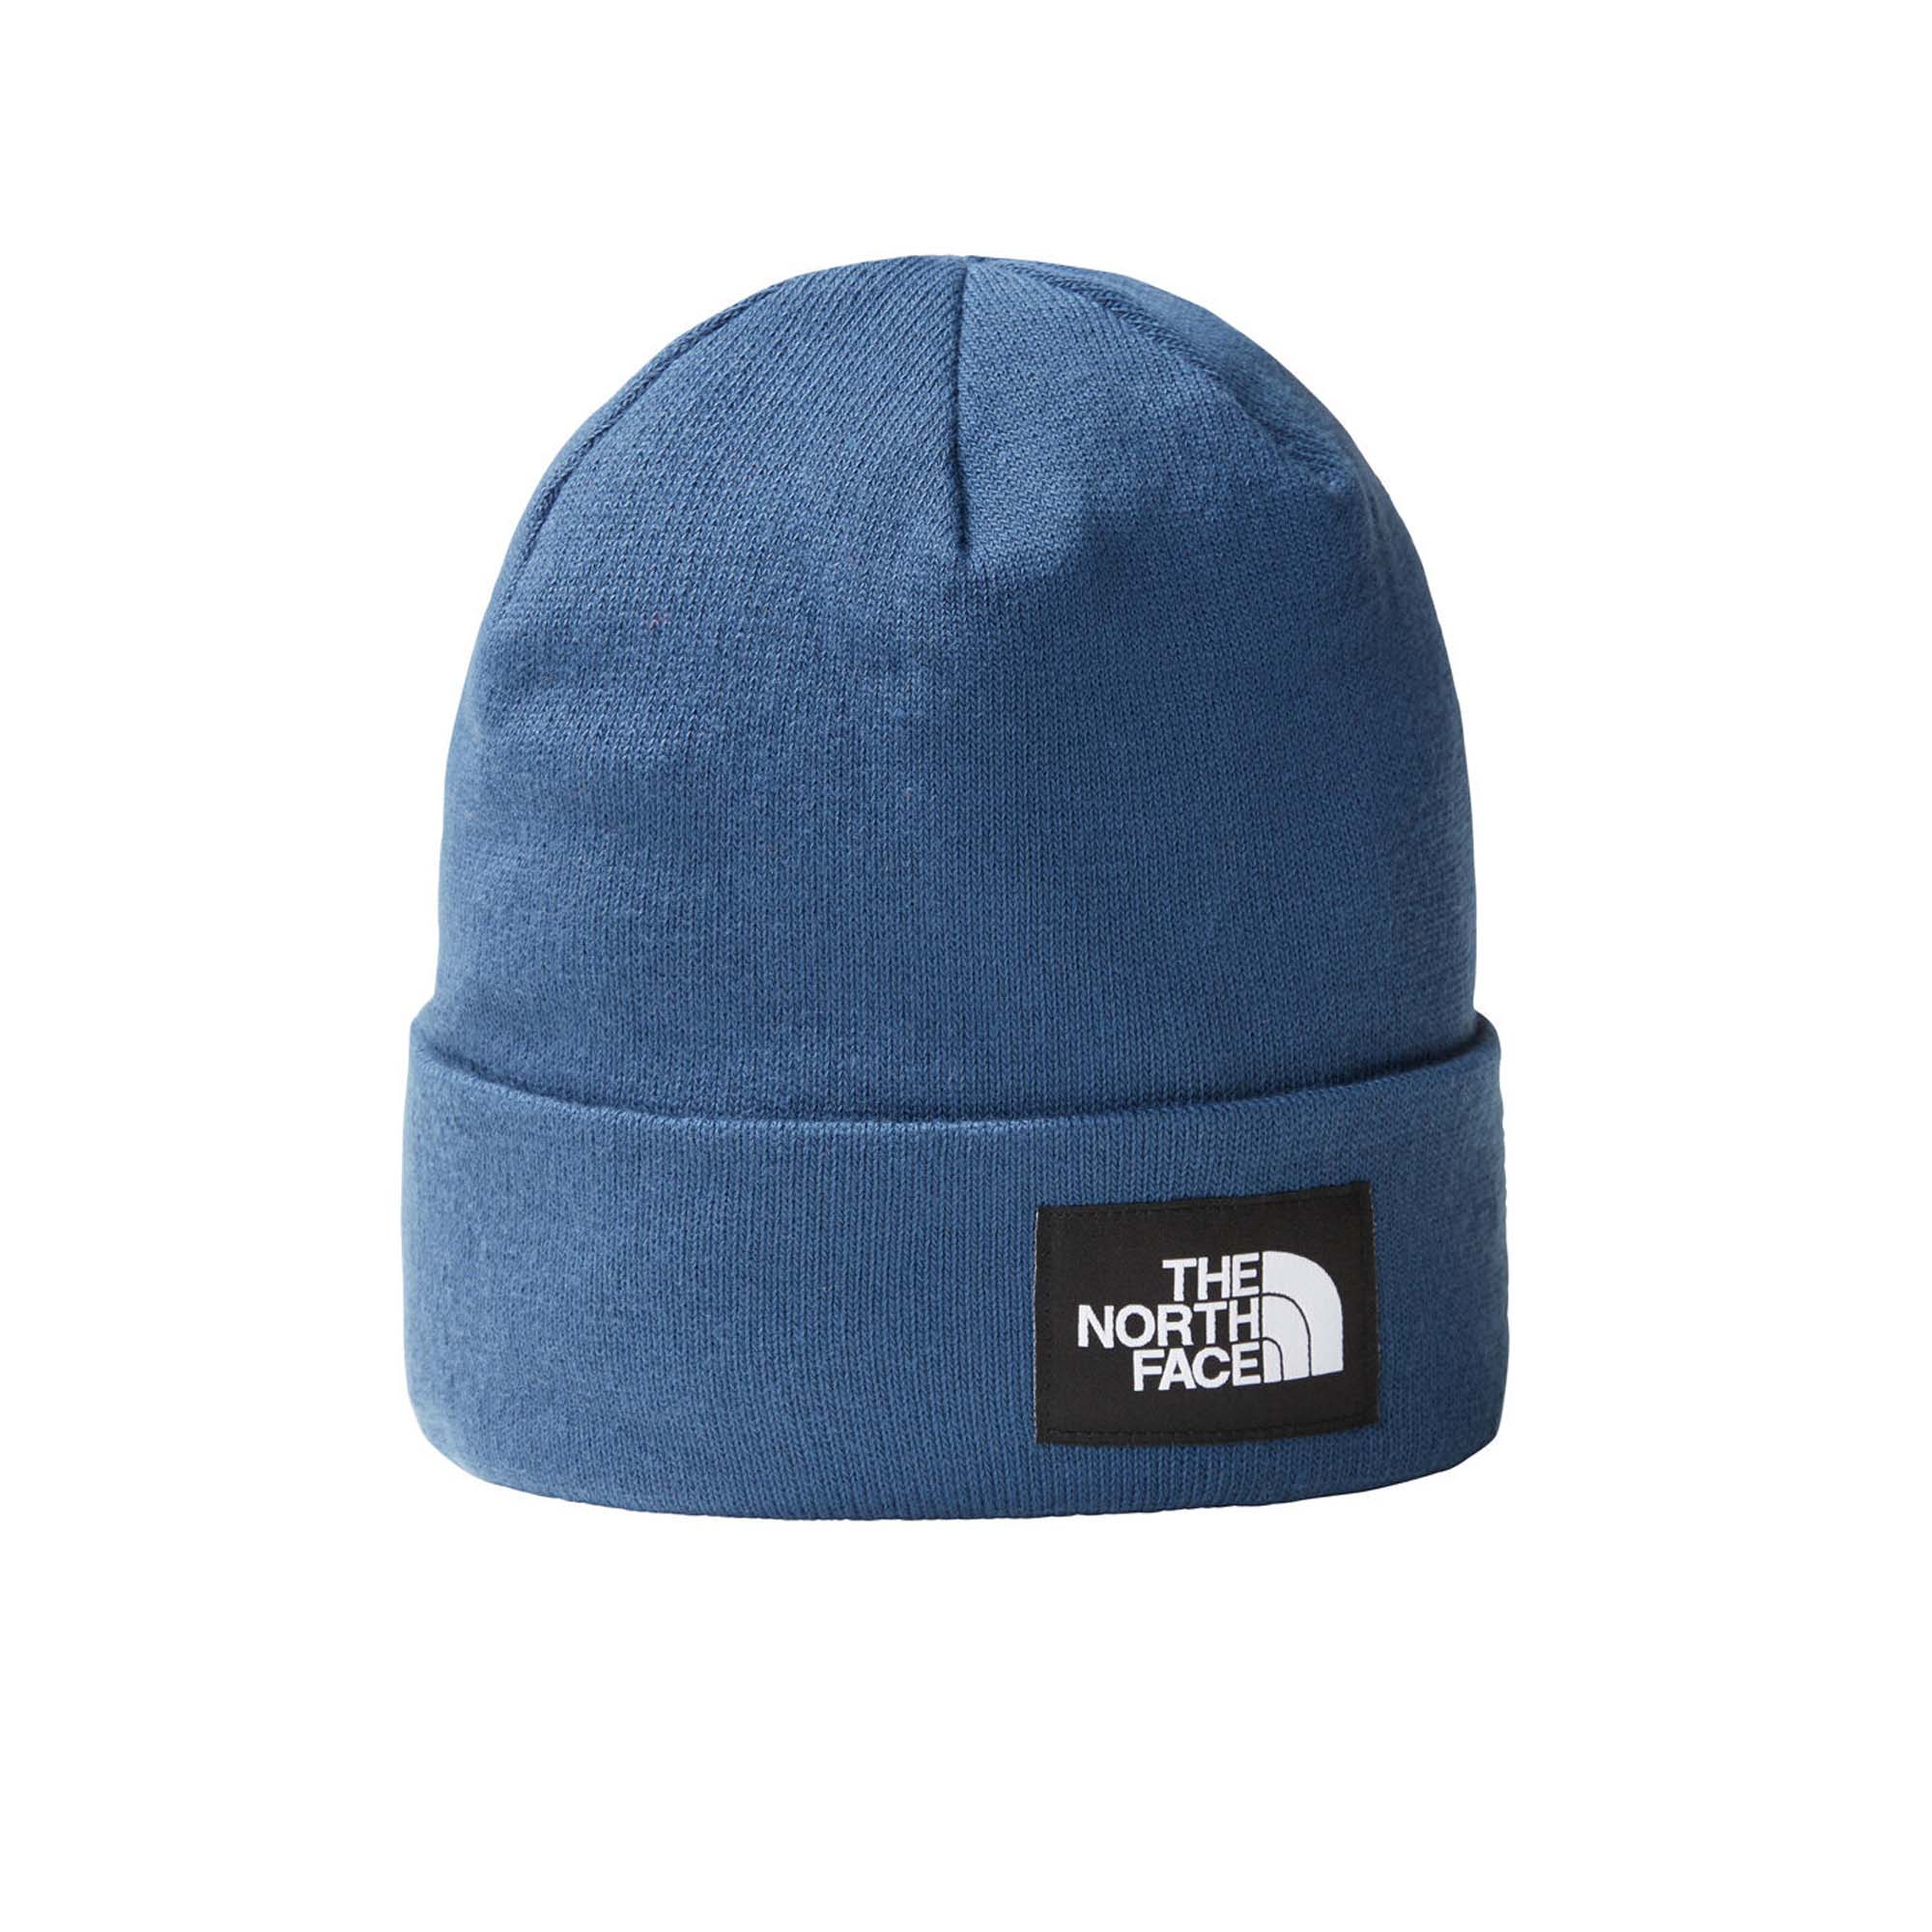 THE NORTH FACE dock worker recycled beanie